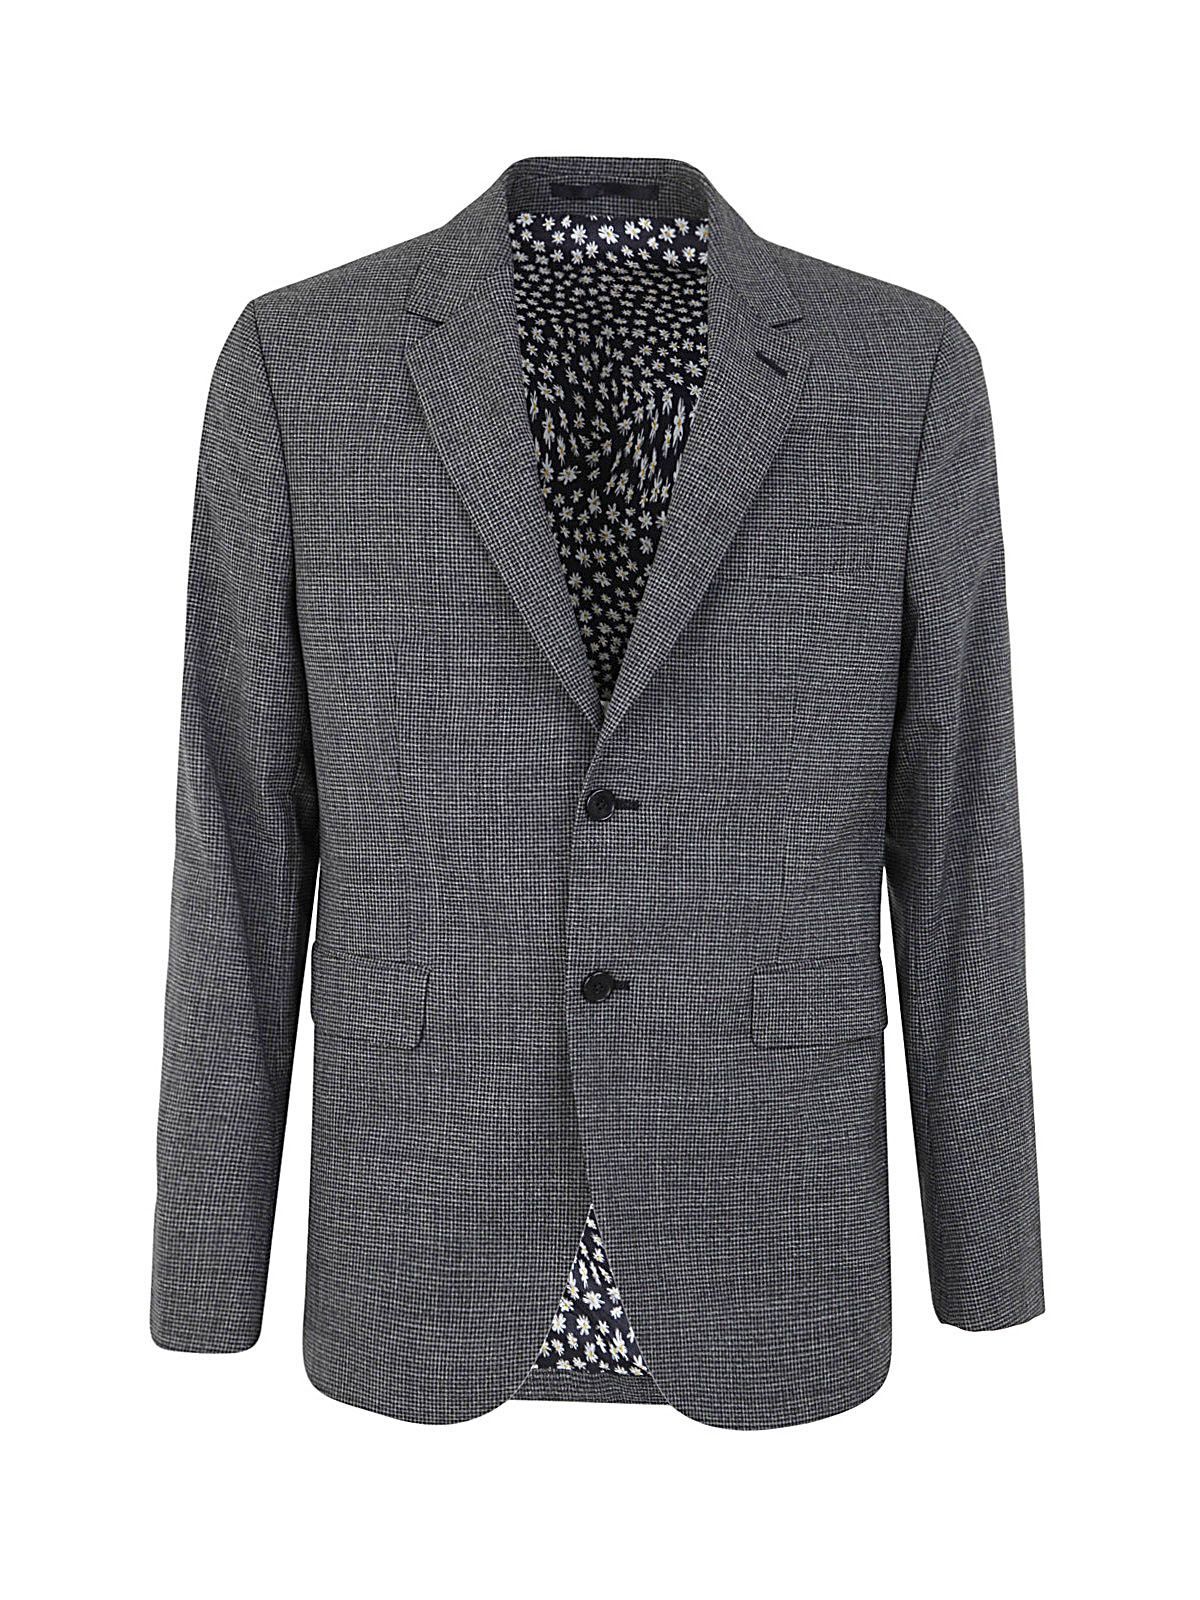 Paul Smith Gents Two Button Jacket In Black